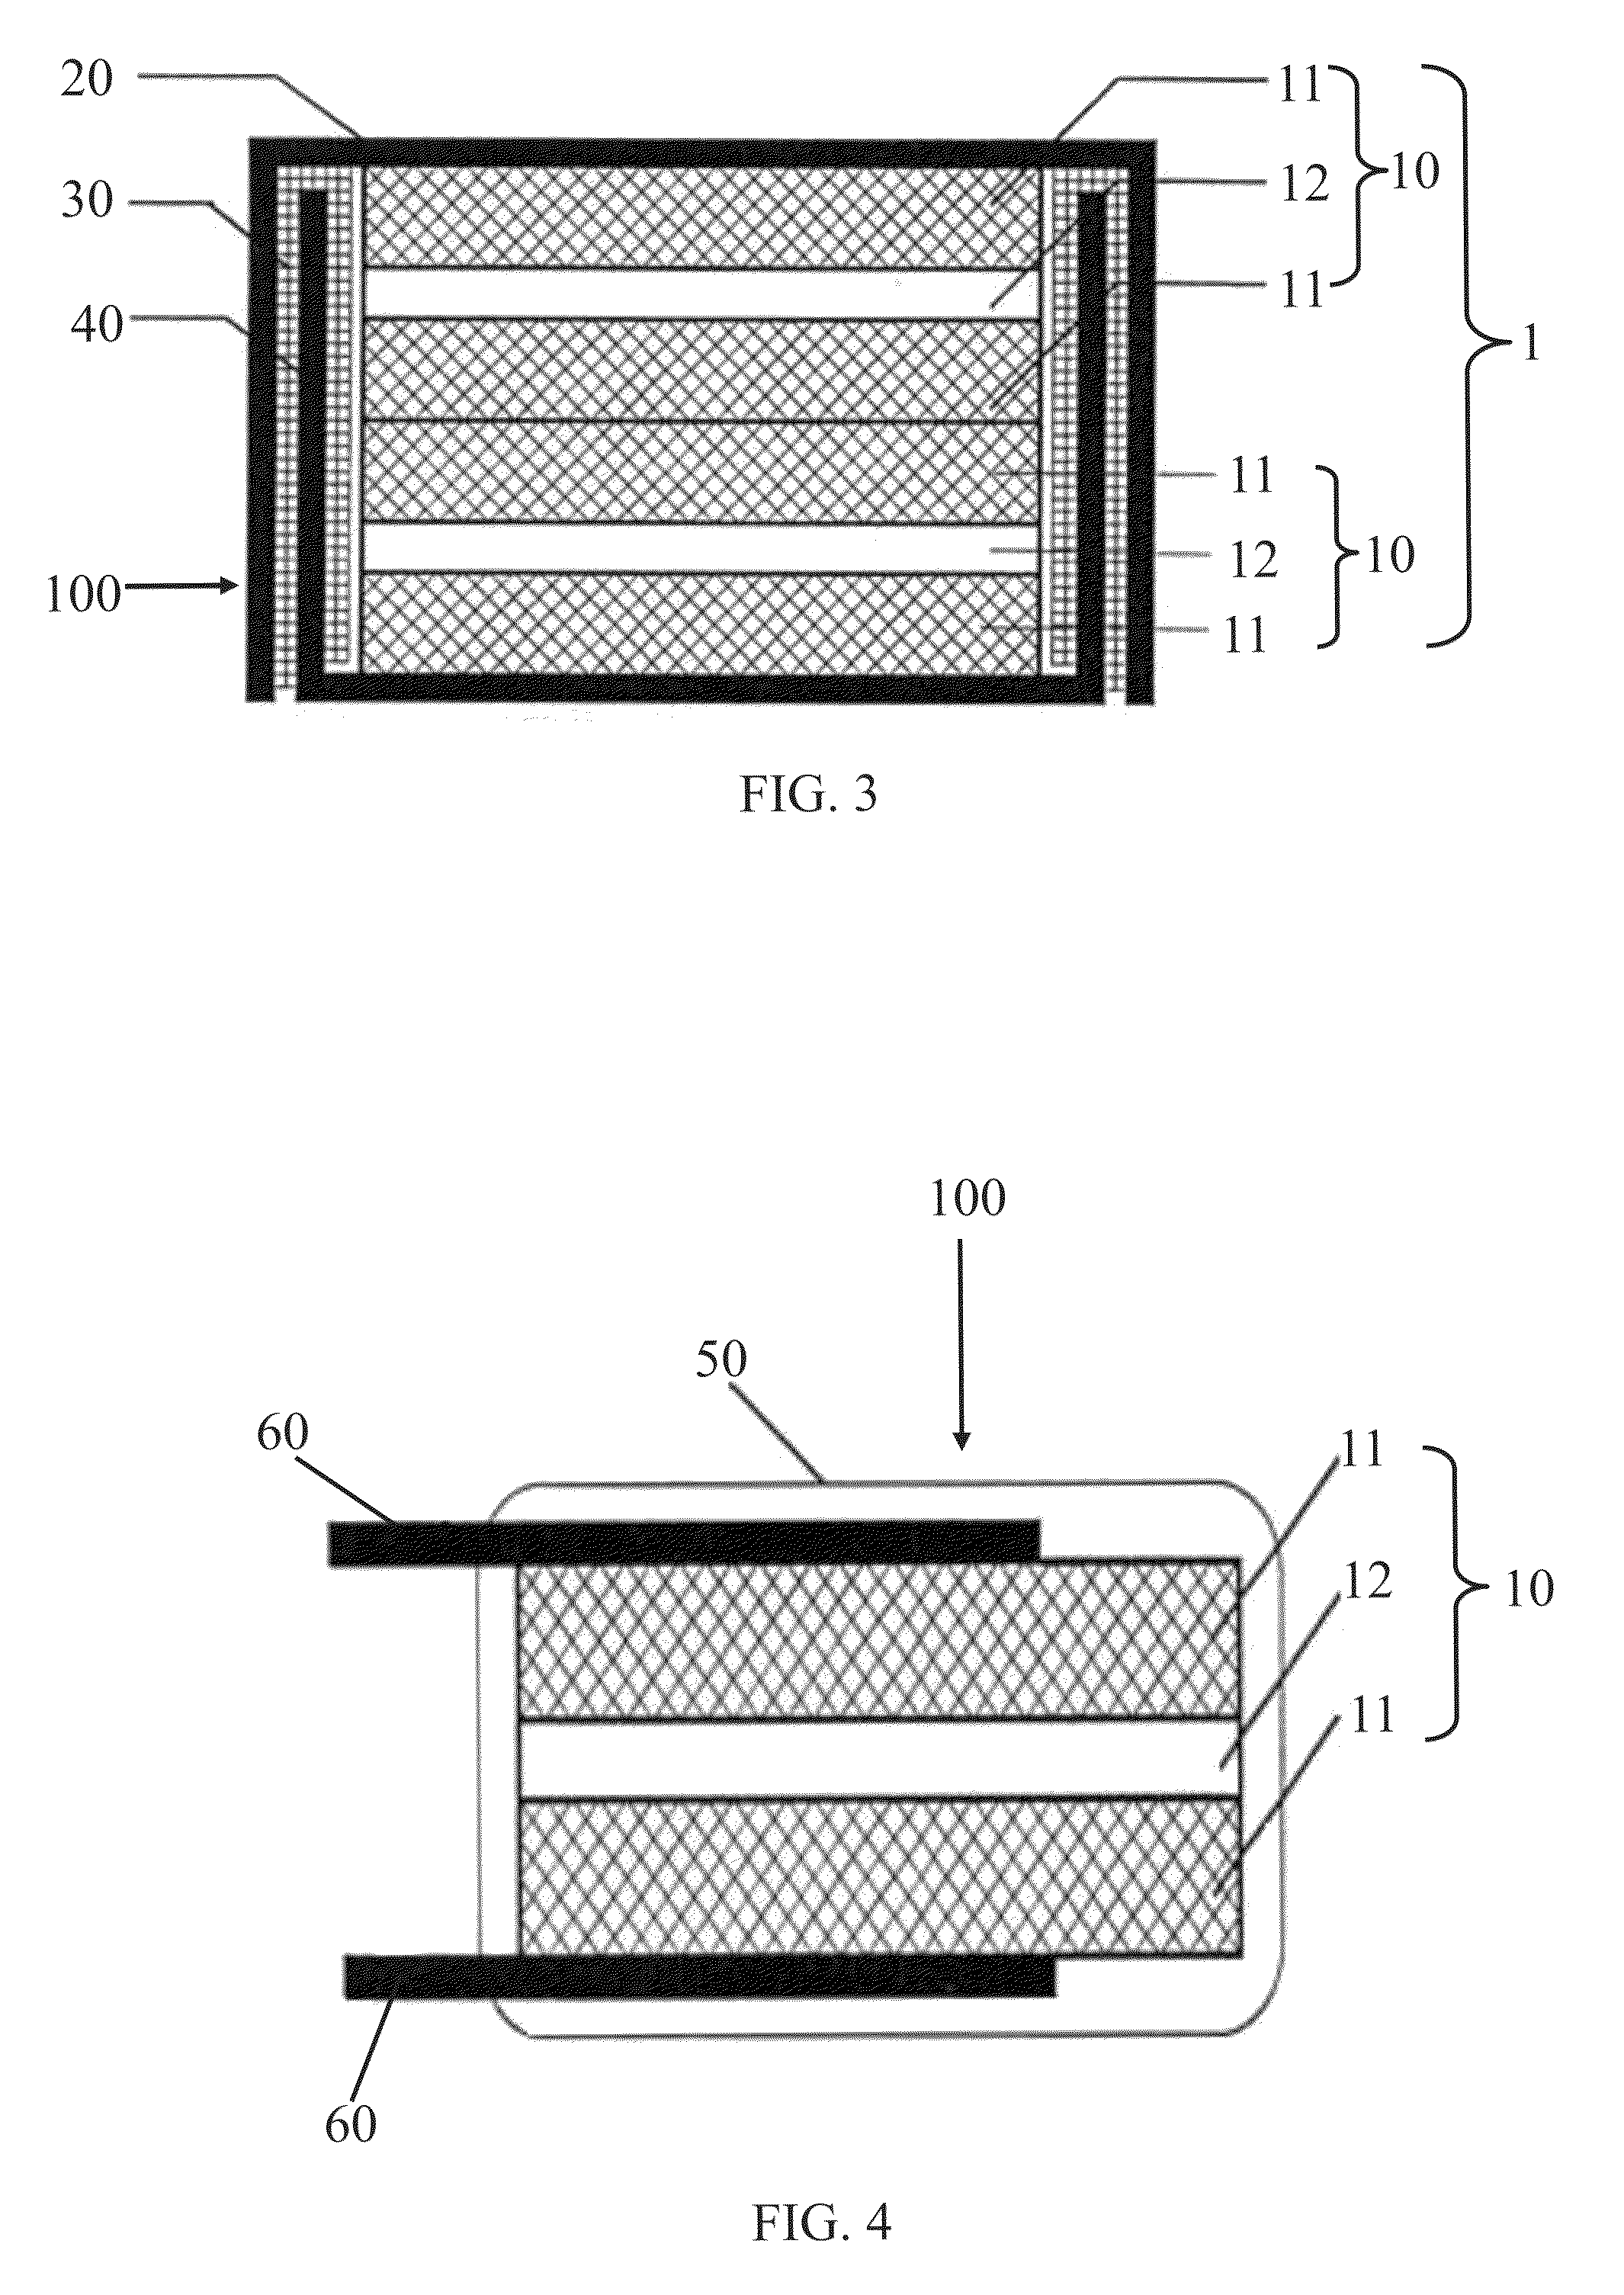 Packaging structures of an energy storage device